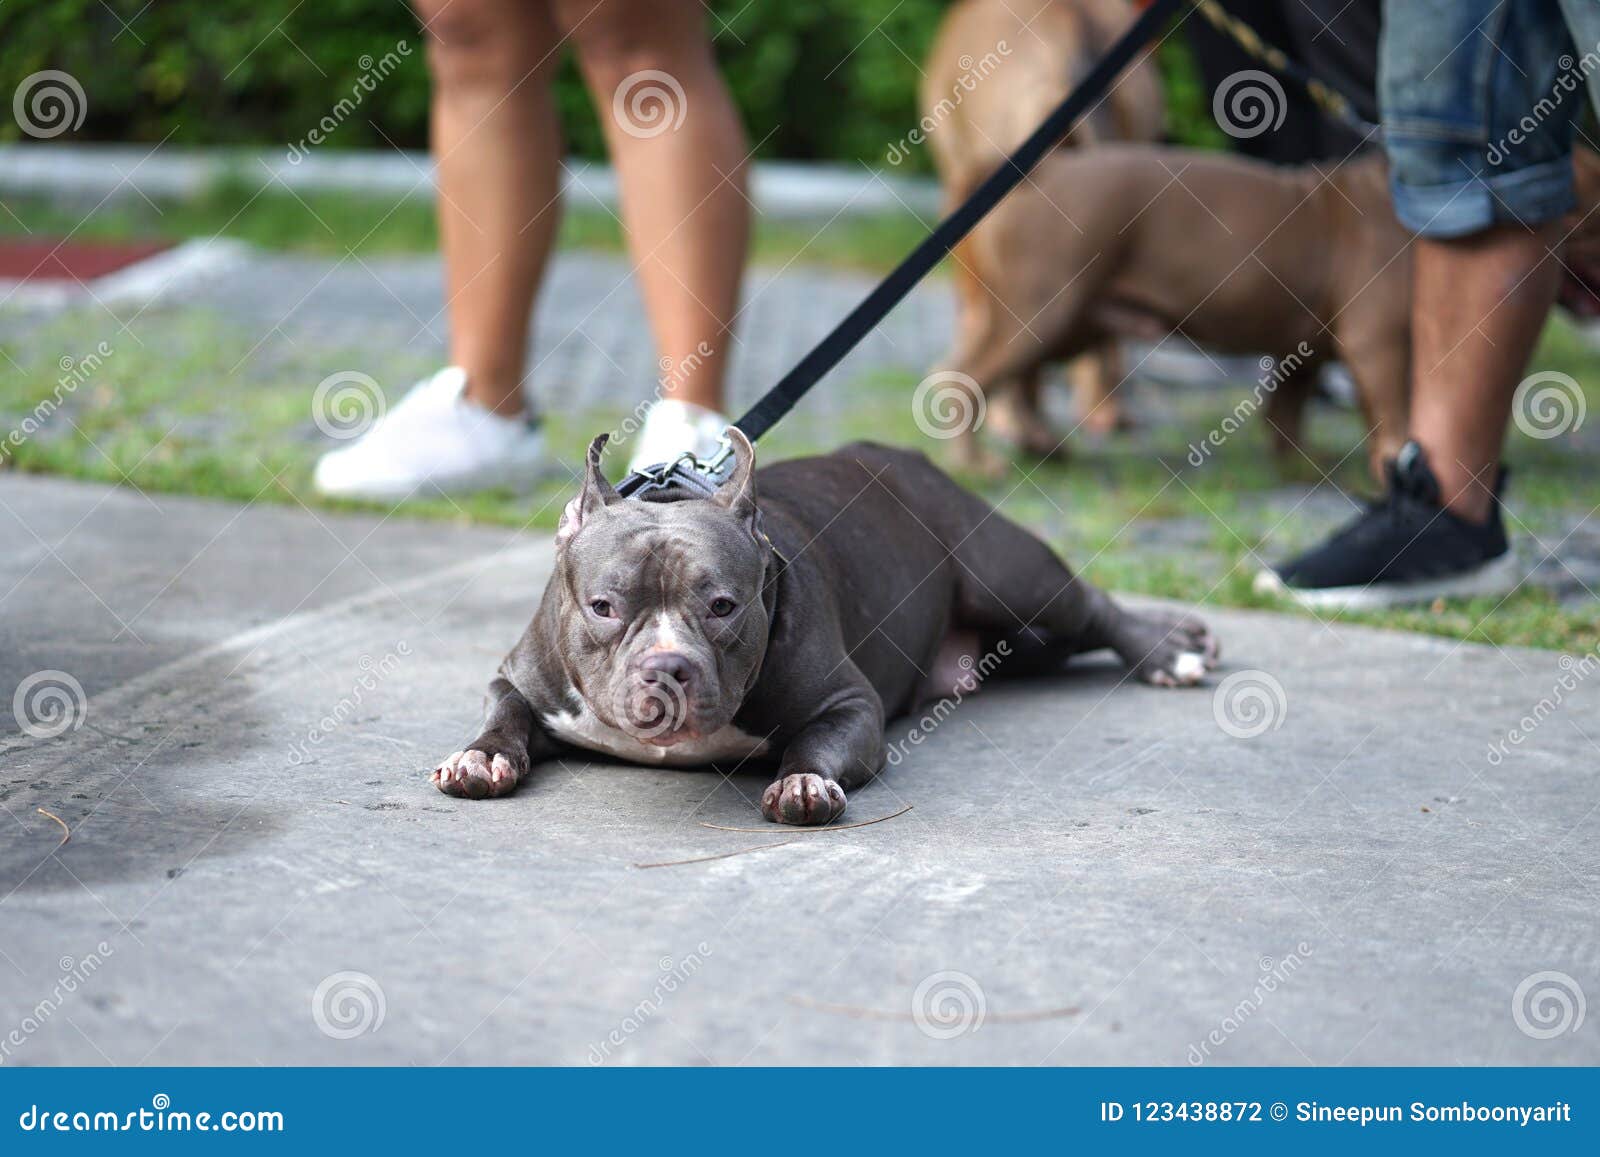 Grey Color Pitbull Dog With Cropped Ears Lying Down On The Floor